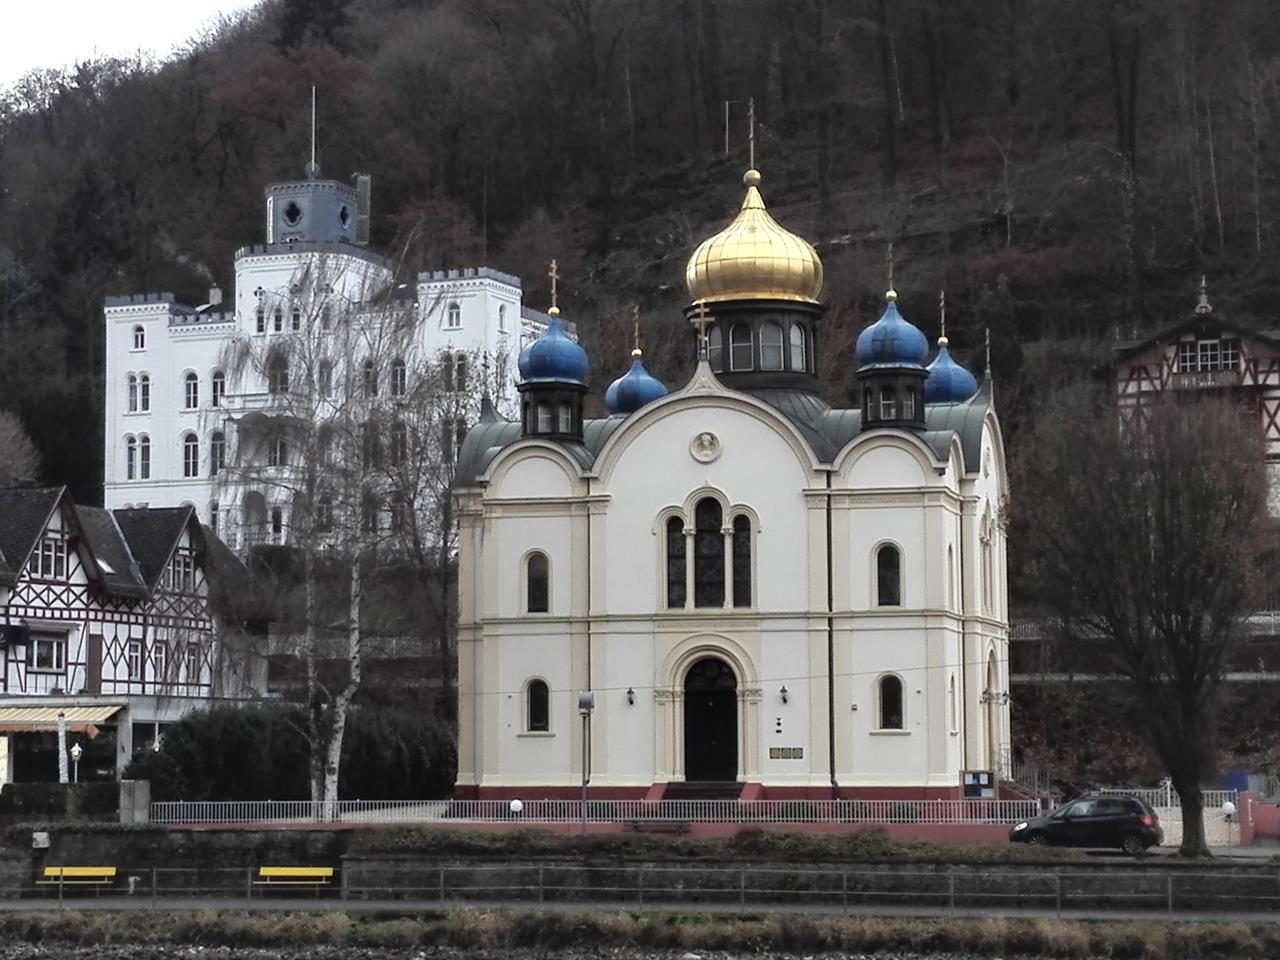 Russisch-Orthodoxe Kirche in Bad Ems